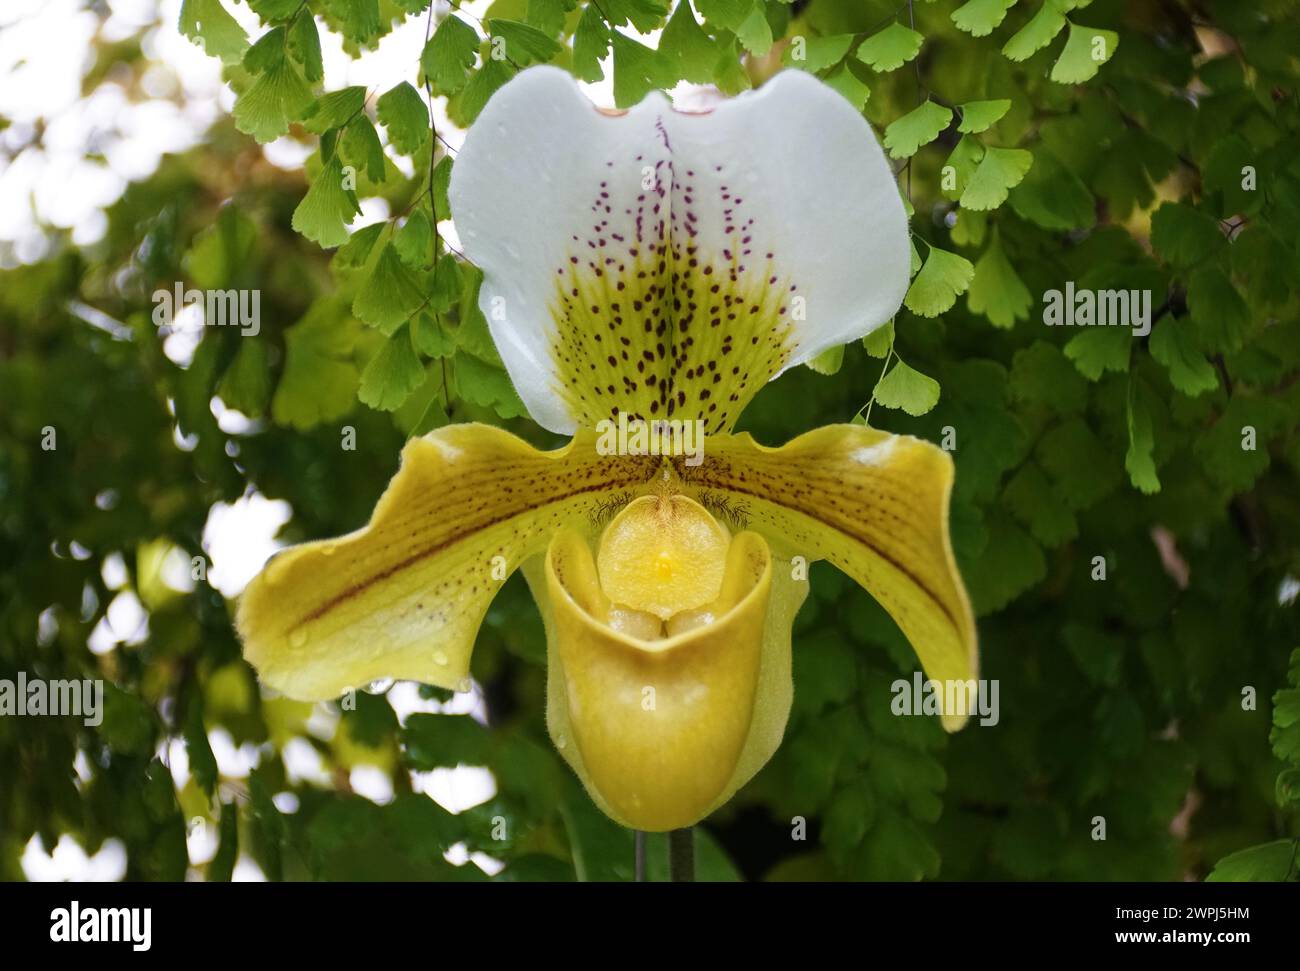 Closeup of the white and yellow color of Paphiopedilum Beatrice orchid at full bloom Stock Photo